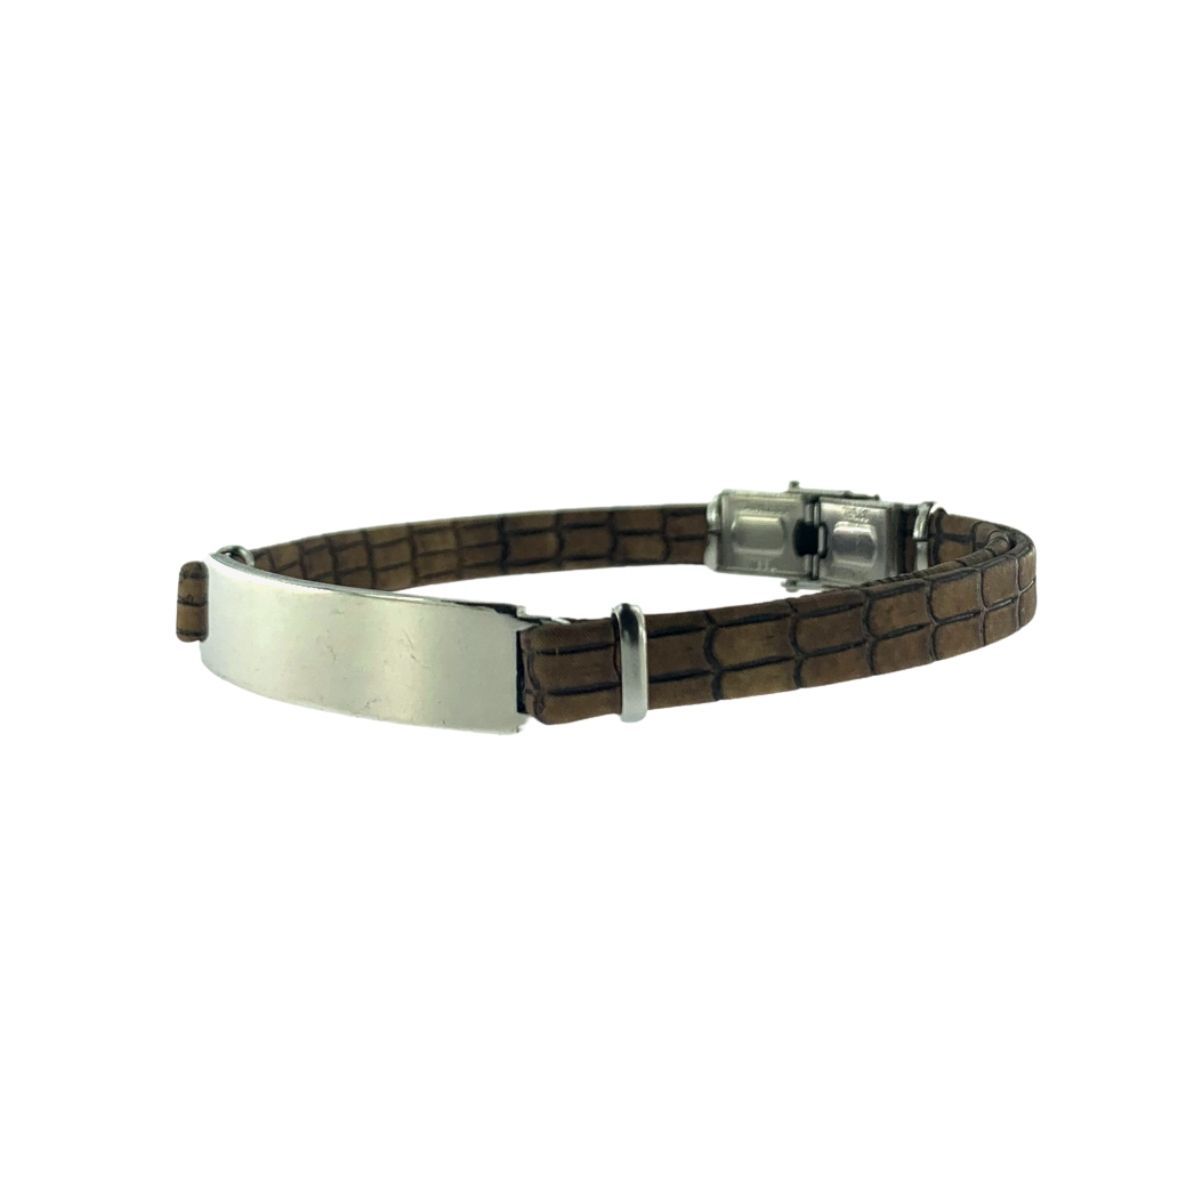 BROWN PRINTED LEATHER BRACELET WITH STEEL PLATE